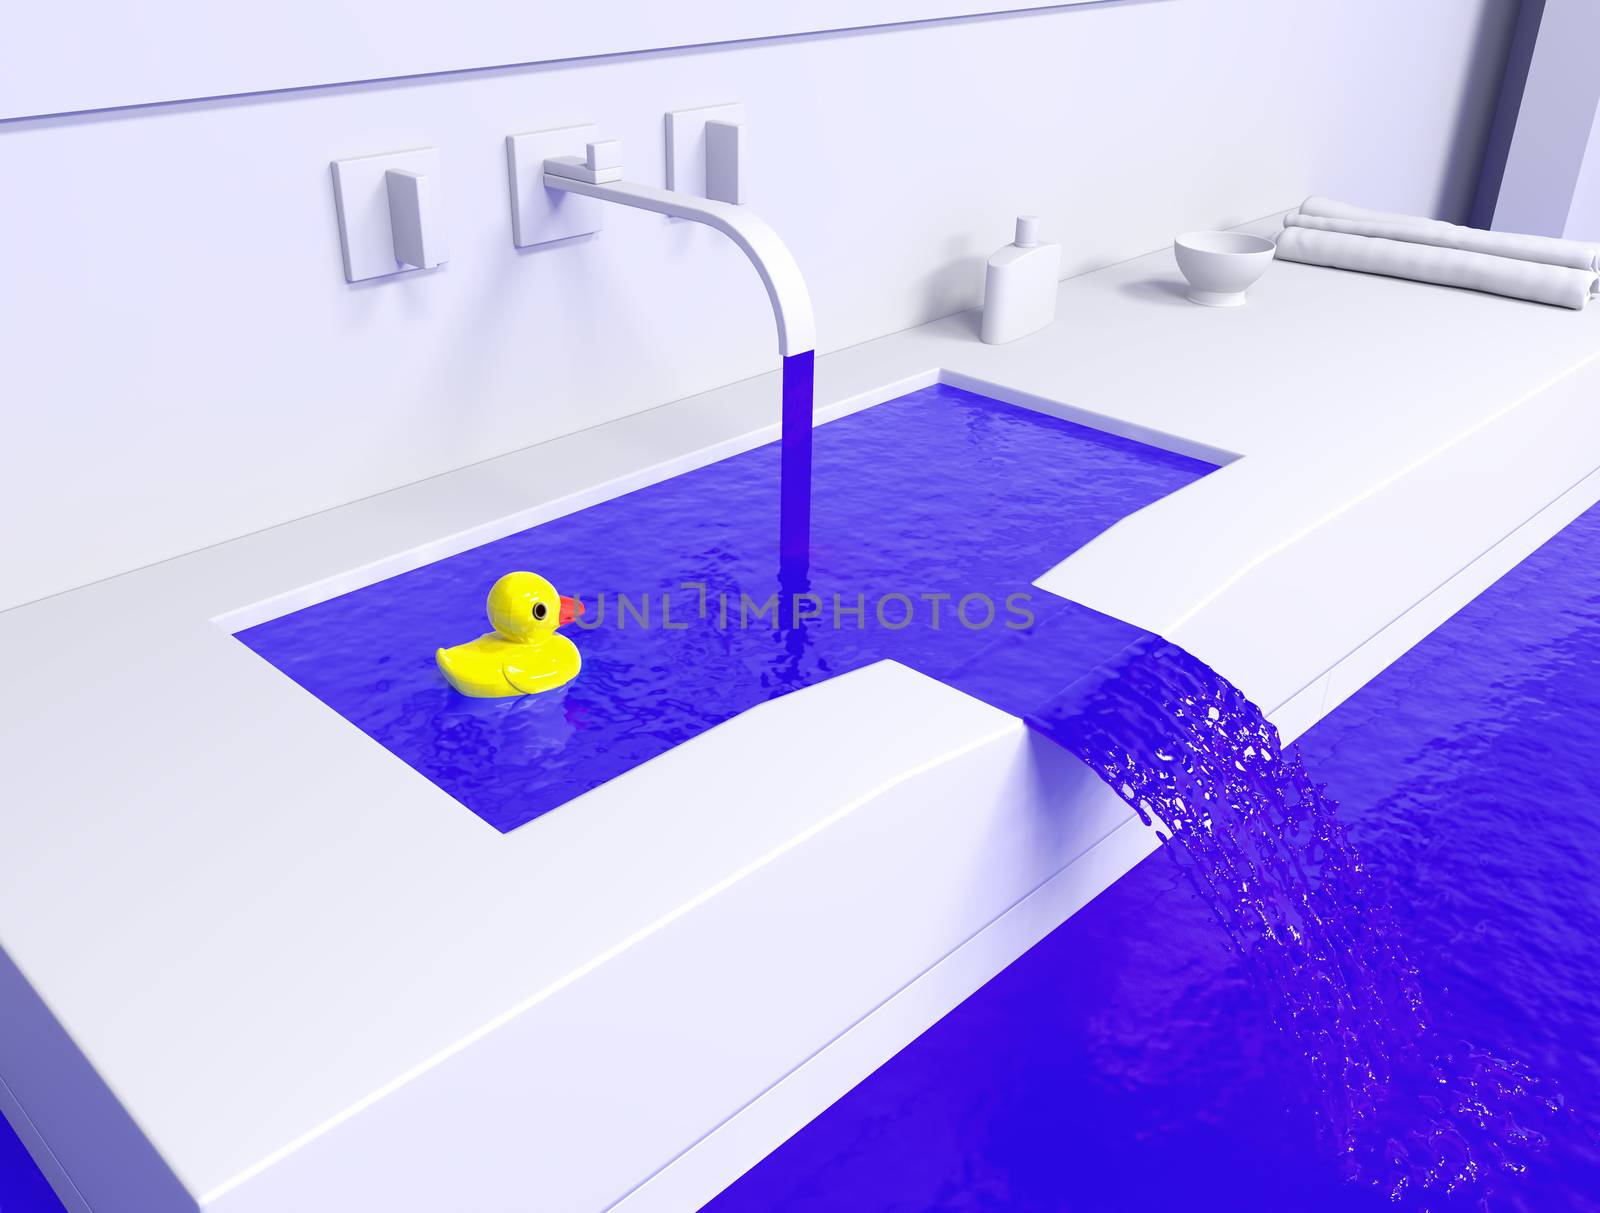 rubber duck in the flooded sink (3d concept)